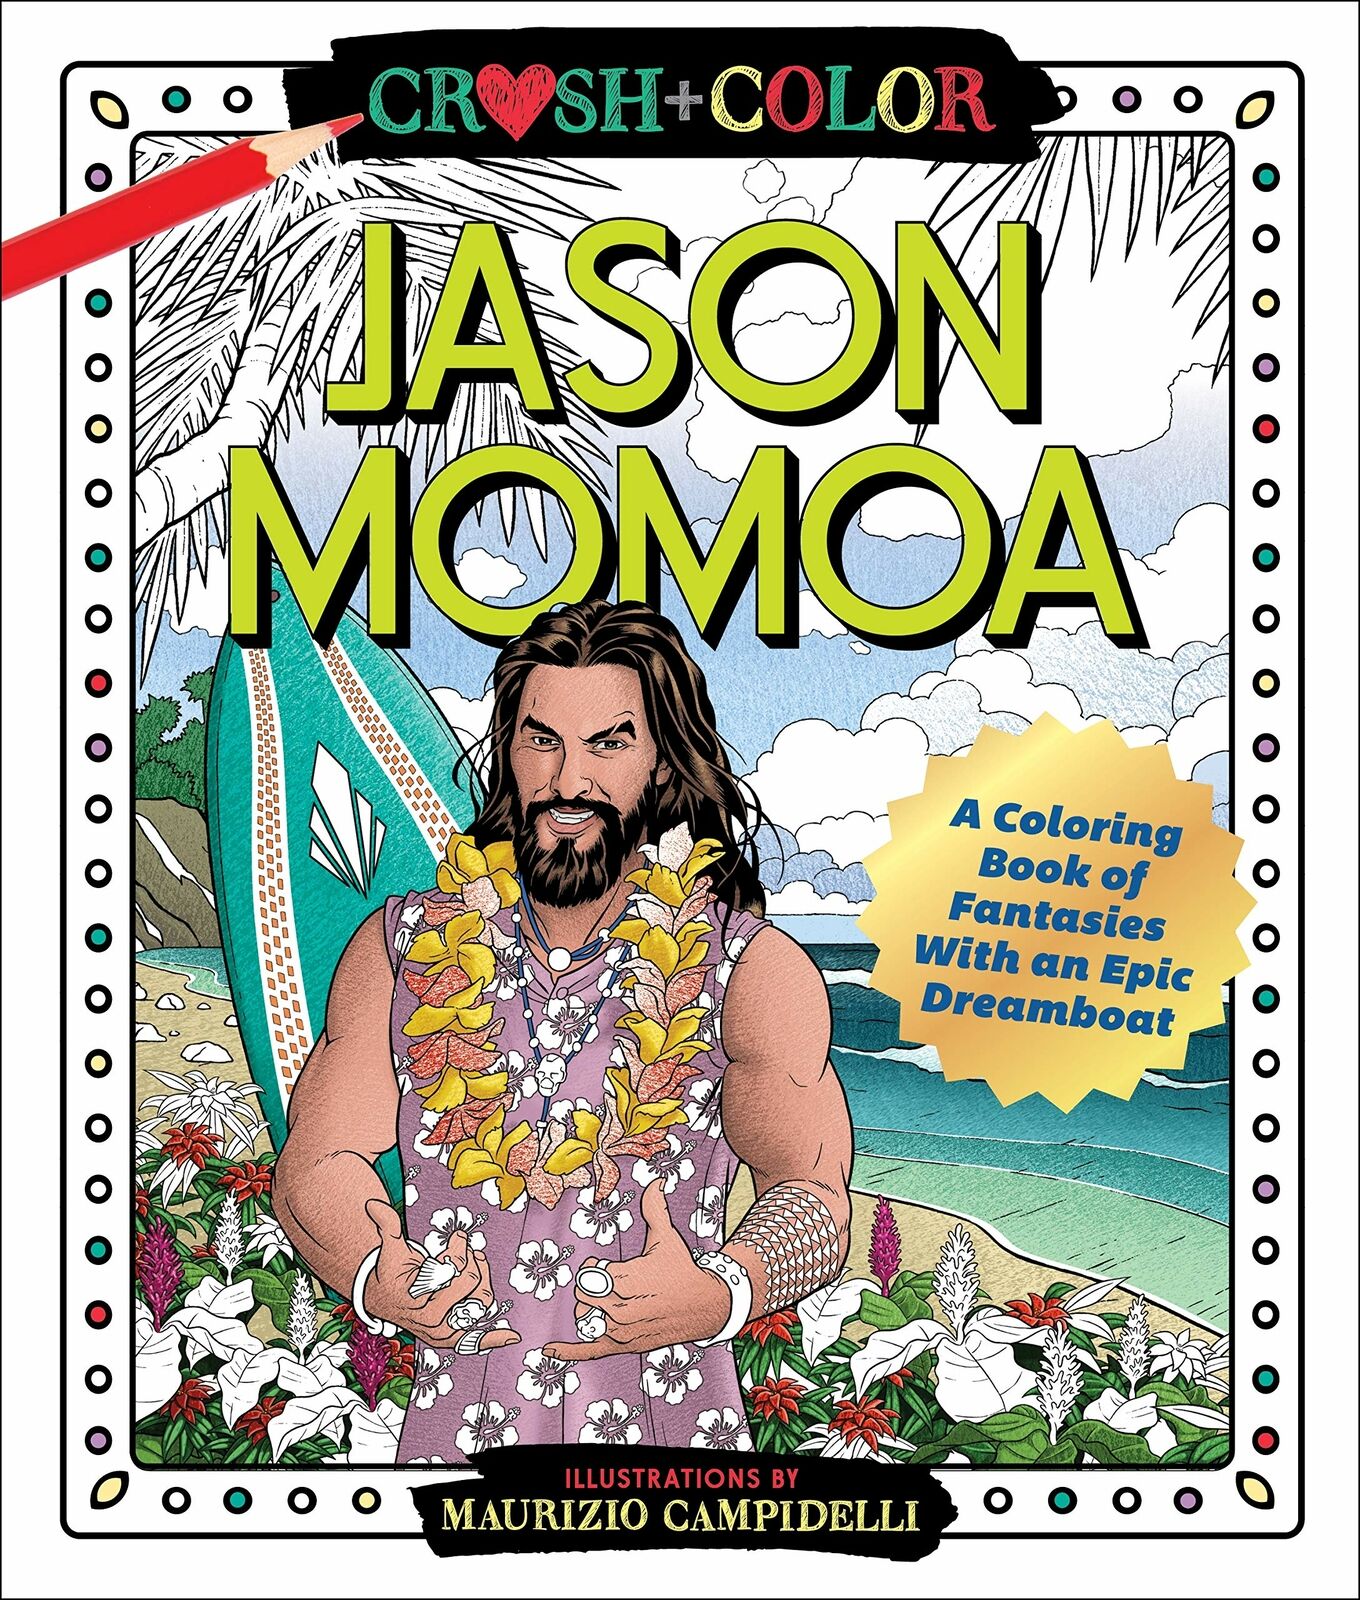 Download CRUSH AND COLOR JASON MOMOA A COLORING BOOK OF FANTASIES WITH AN EPIC DREAMBOAT - iCommerce on Web